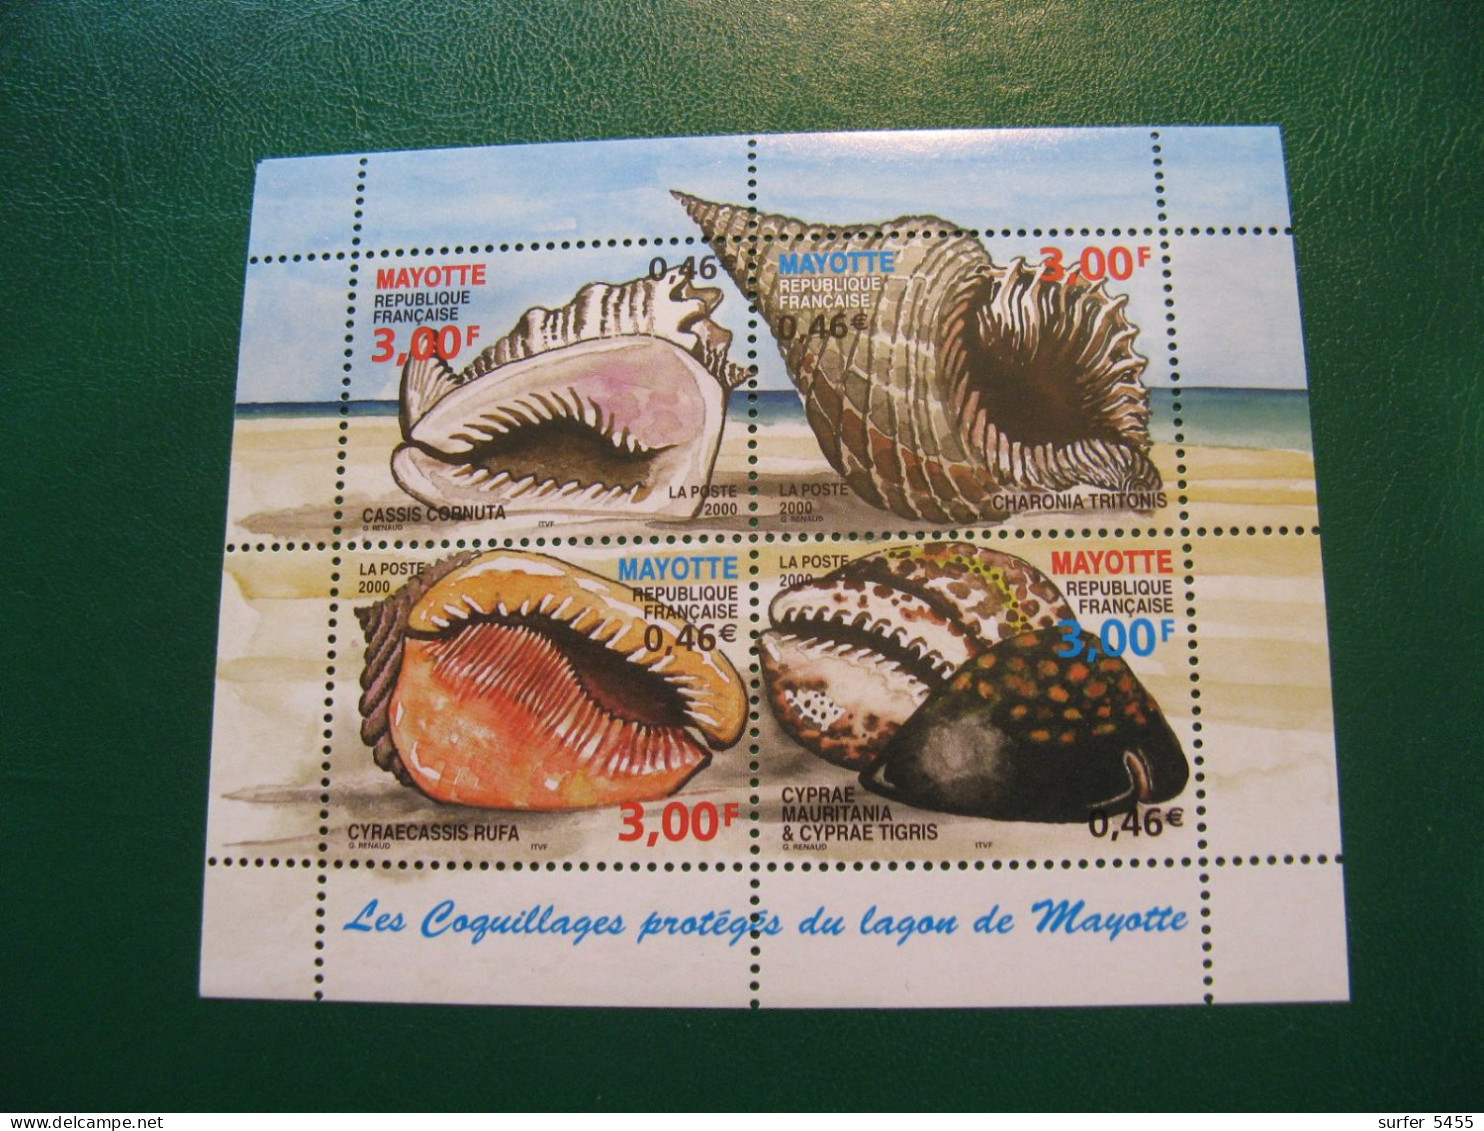 MAYOTTE BLOC FEUILLET N° 4 NEUF** LUXE - MNH - COTE 16,00 EUROS - Unused Stamps